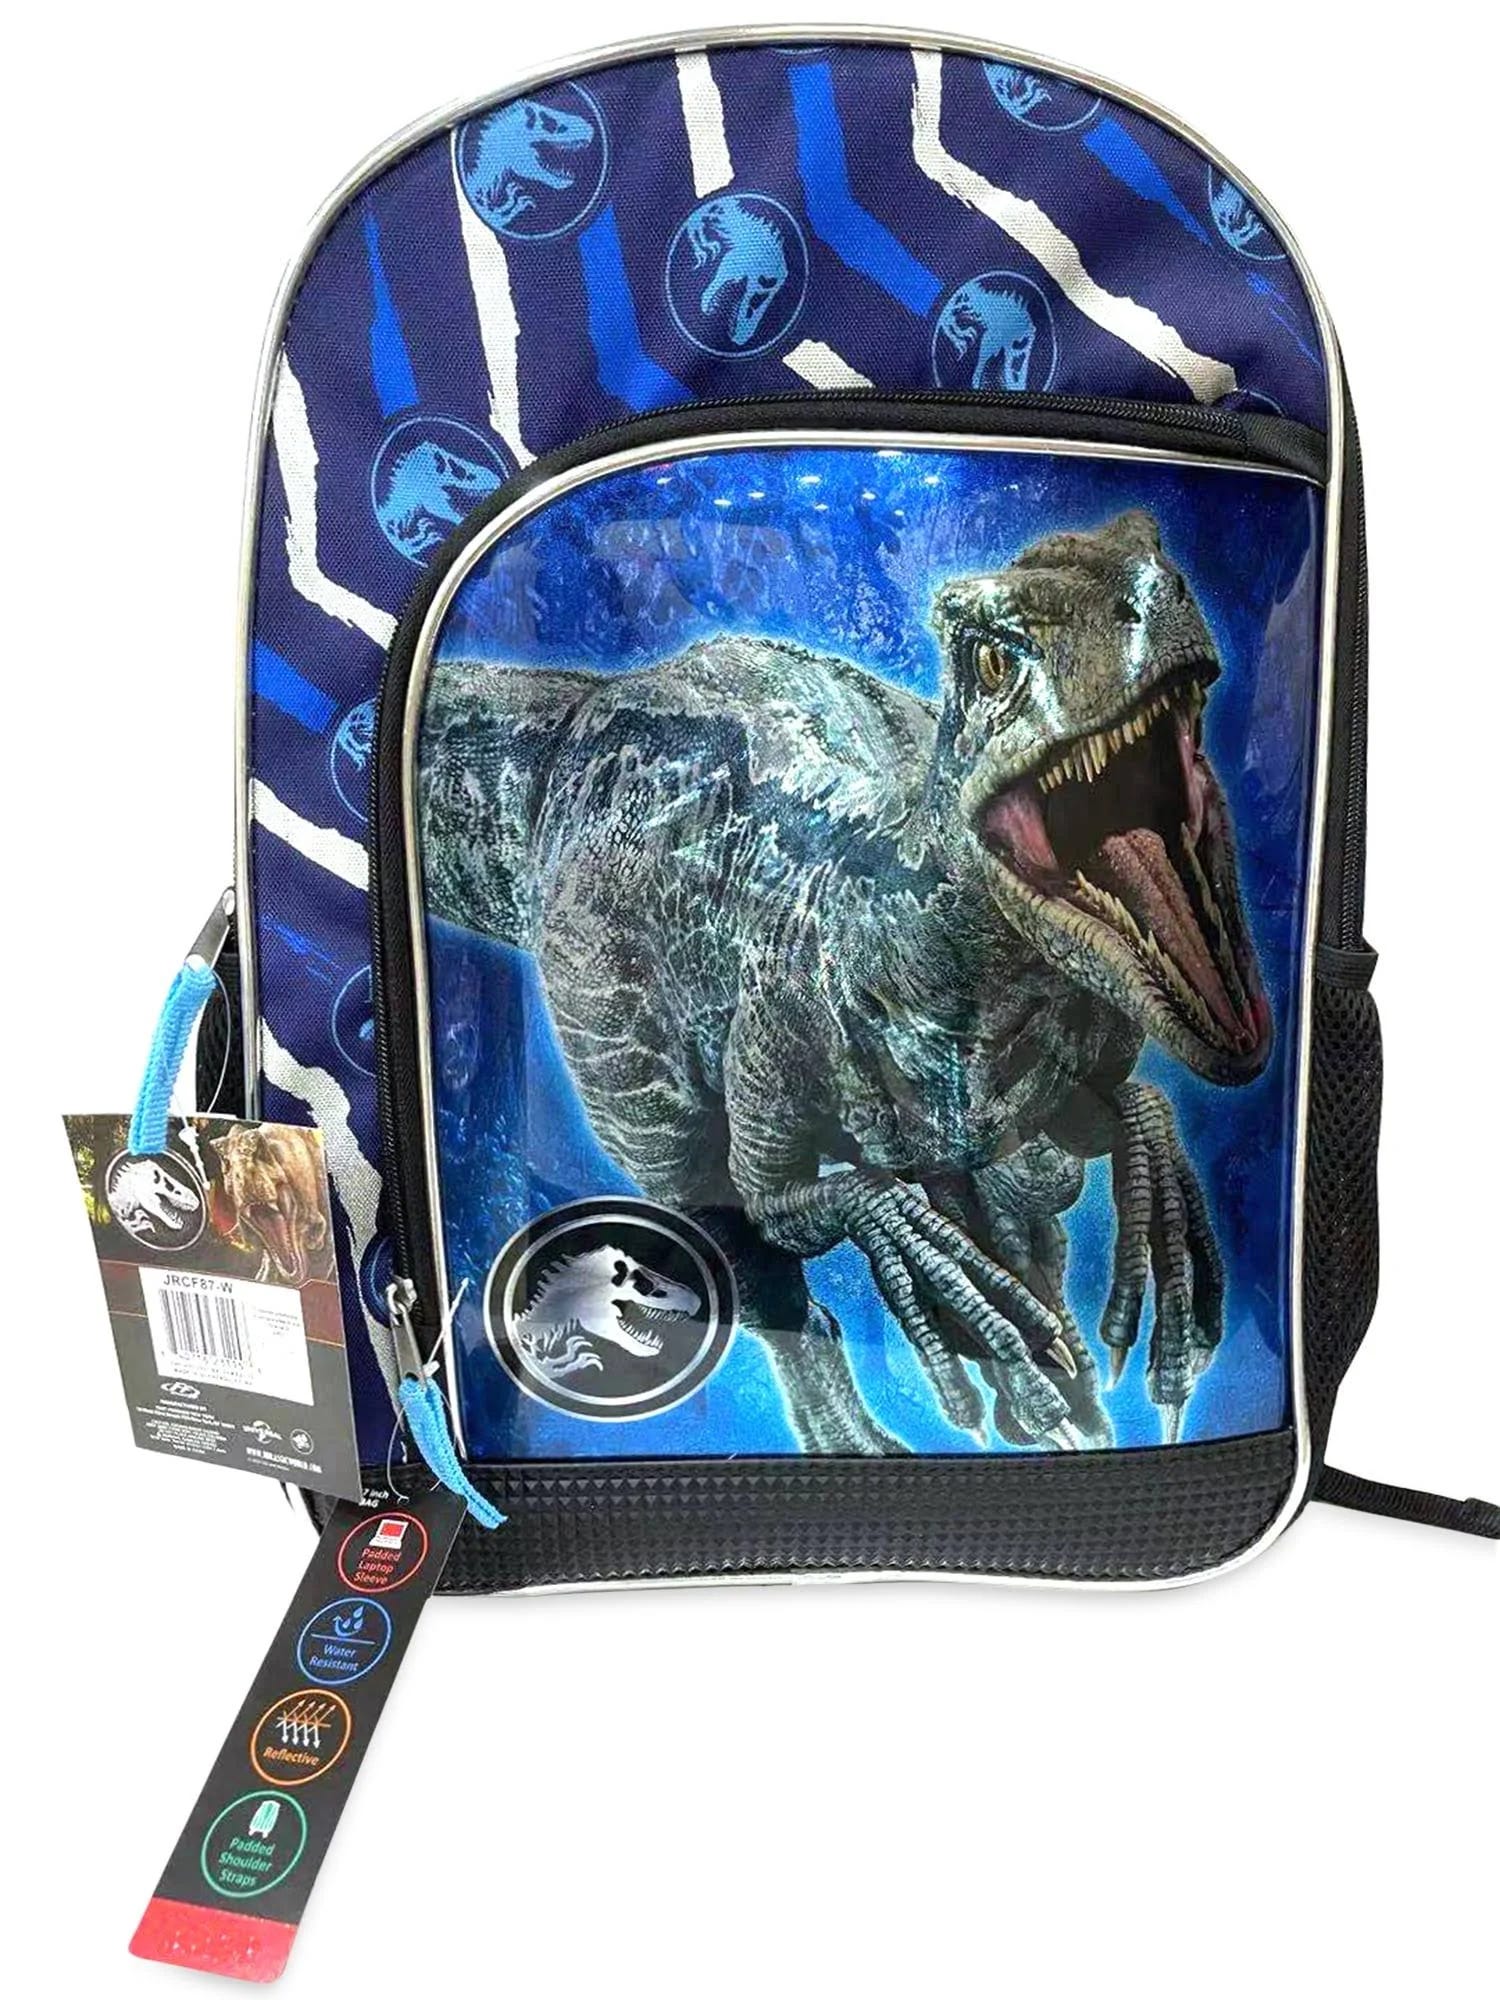 Jurassic World Kids Backpack for School or Play | Image